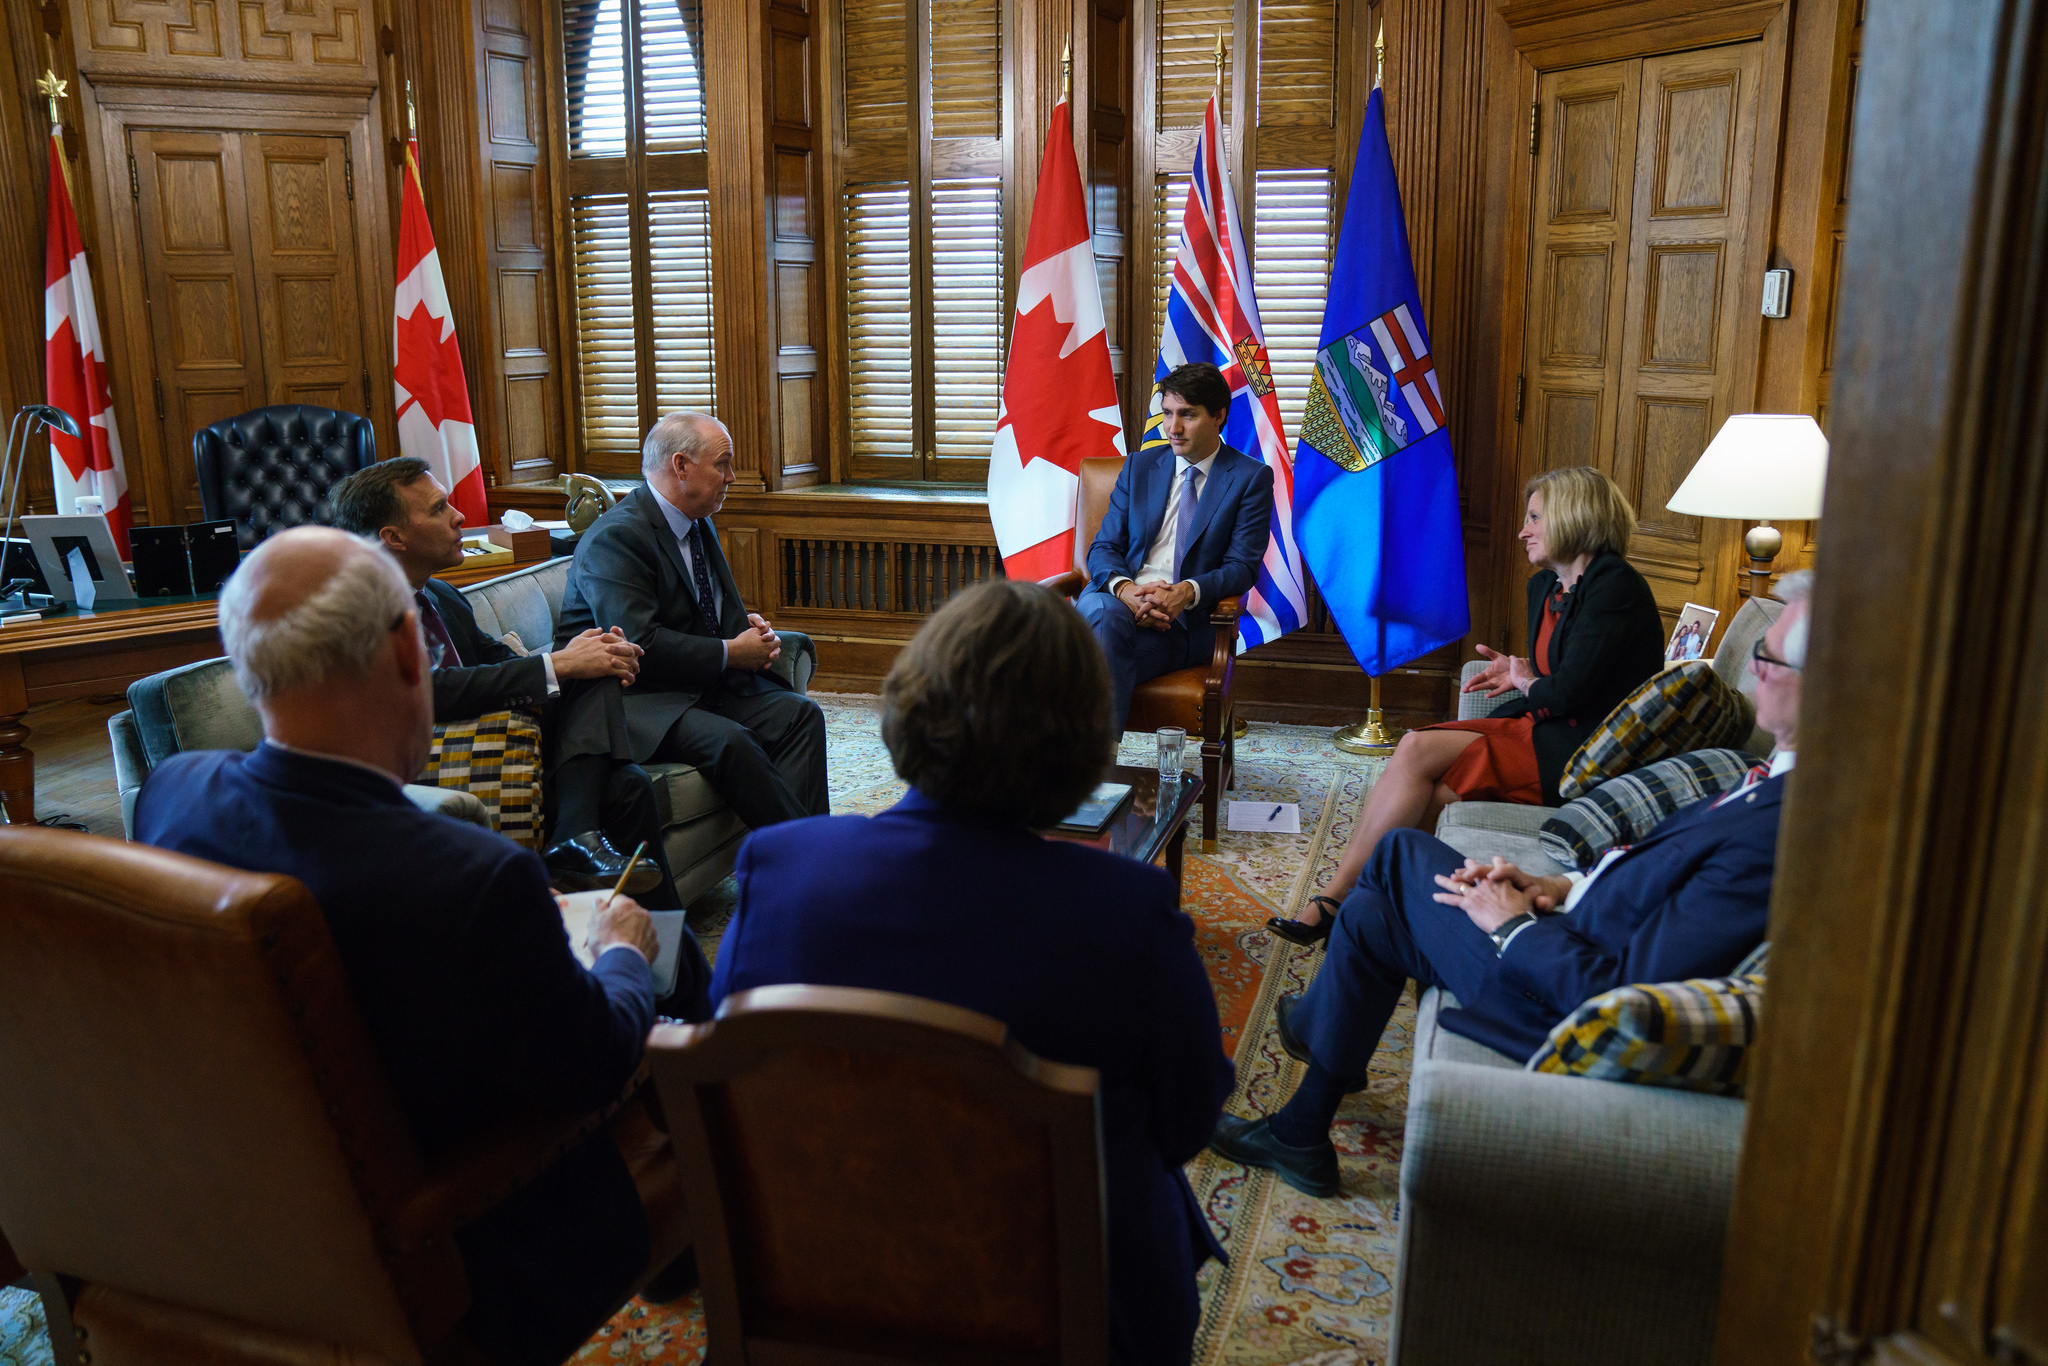 Horgan Notley Trudeau Meeting (Photo: Prime Minister's Office)